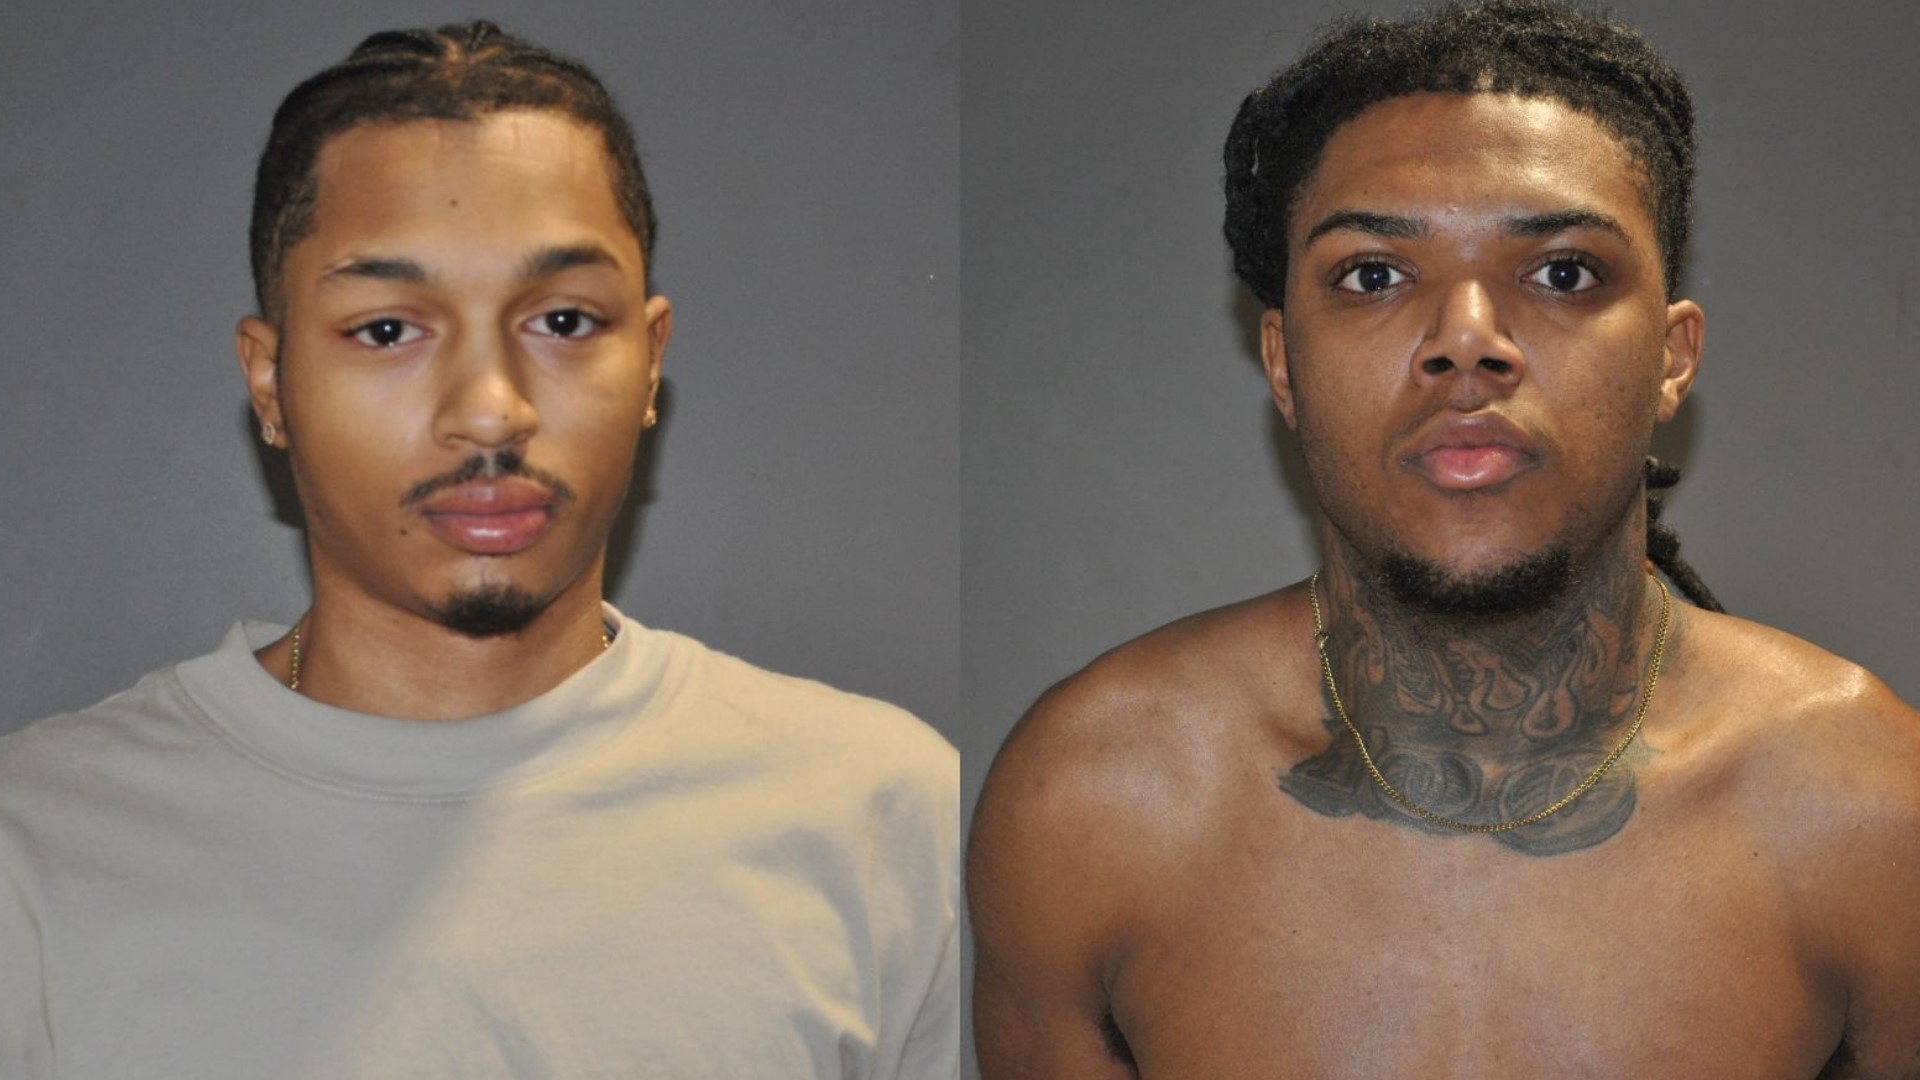 Ryan Strother, 26, and Josaun Banks, 20, were arrested for forgery during the execution of a search warrant for Banks in Whitehall.